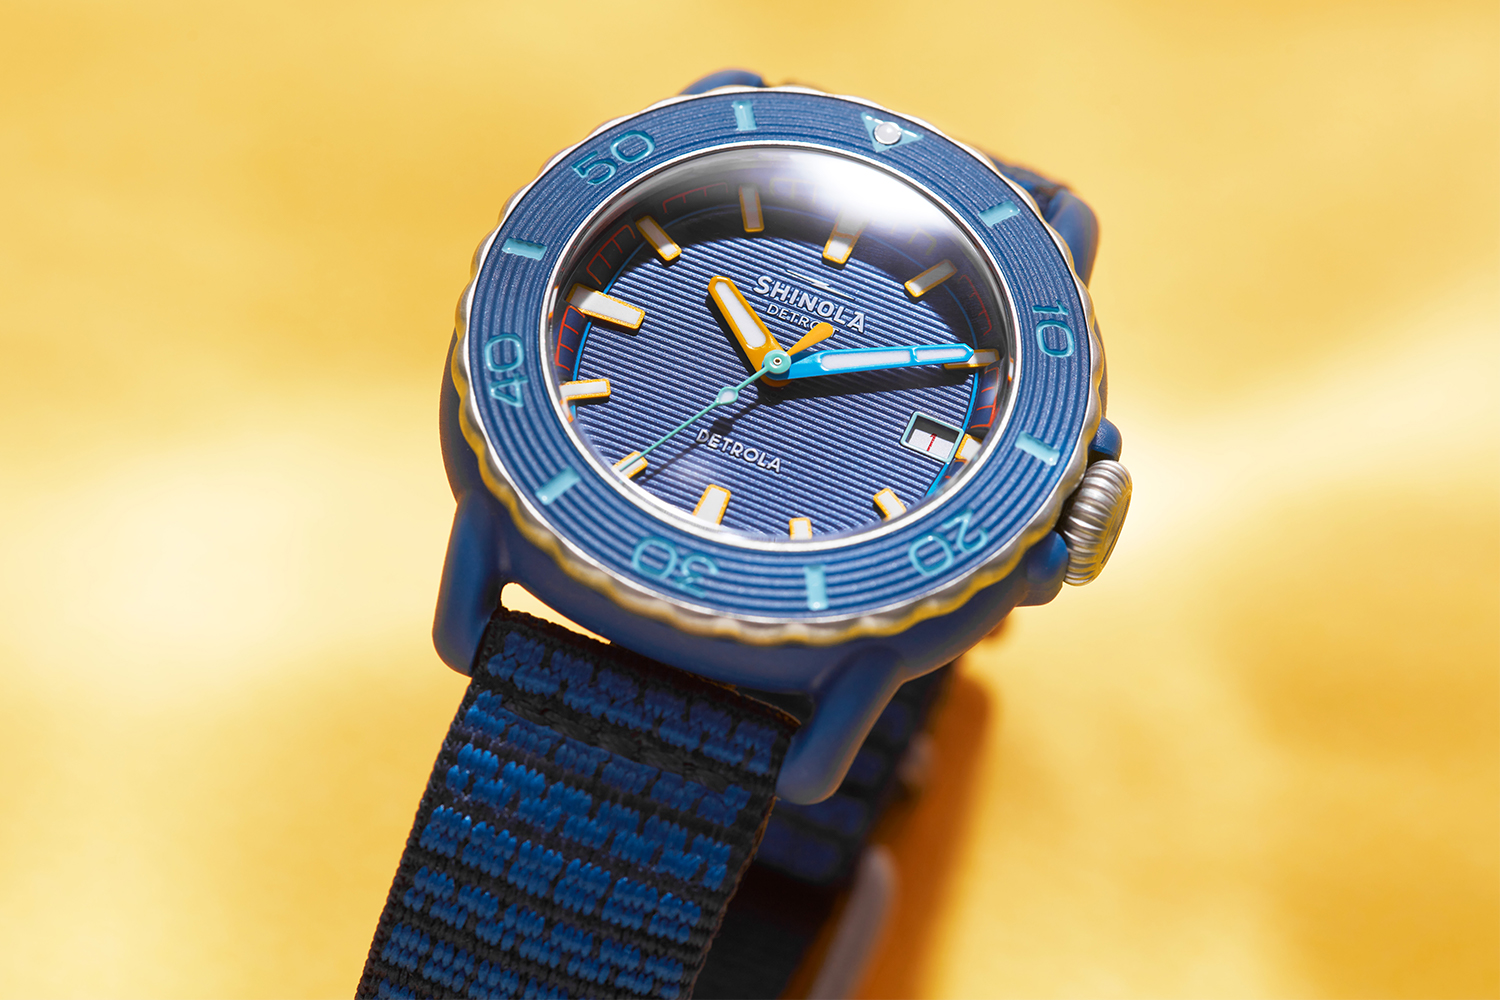 The Shinola Sea Creatures, a version of the quartz-powered Detrola watch that is made partially of ocean-bound plastic.